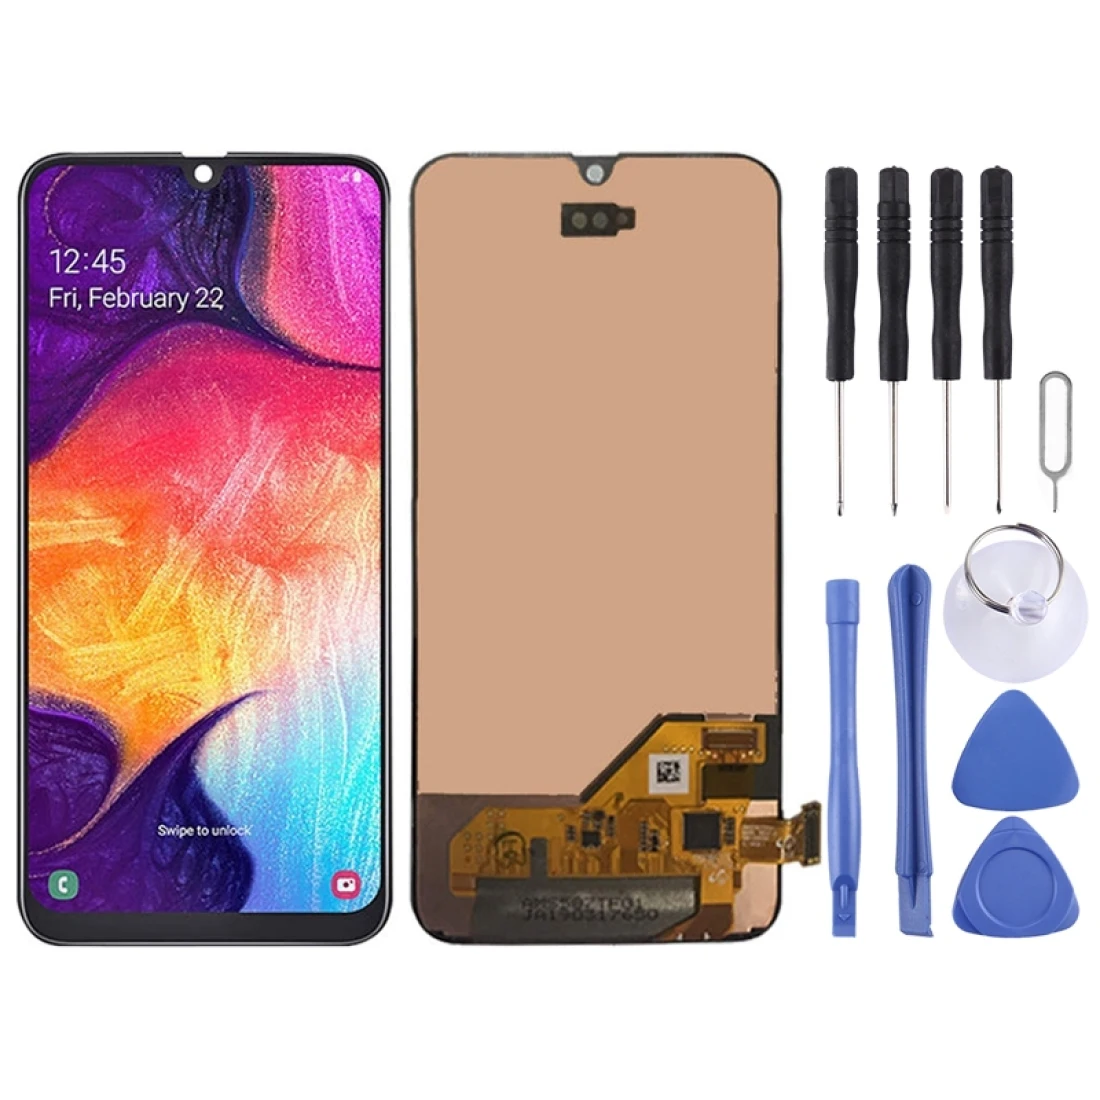 iPartsBuy for Galaxy A40 SM-A405F/DS, SM-A405FN/DS, SM-A405FM/DS LCD Screen and Digitizer Full Assembly